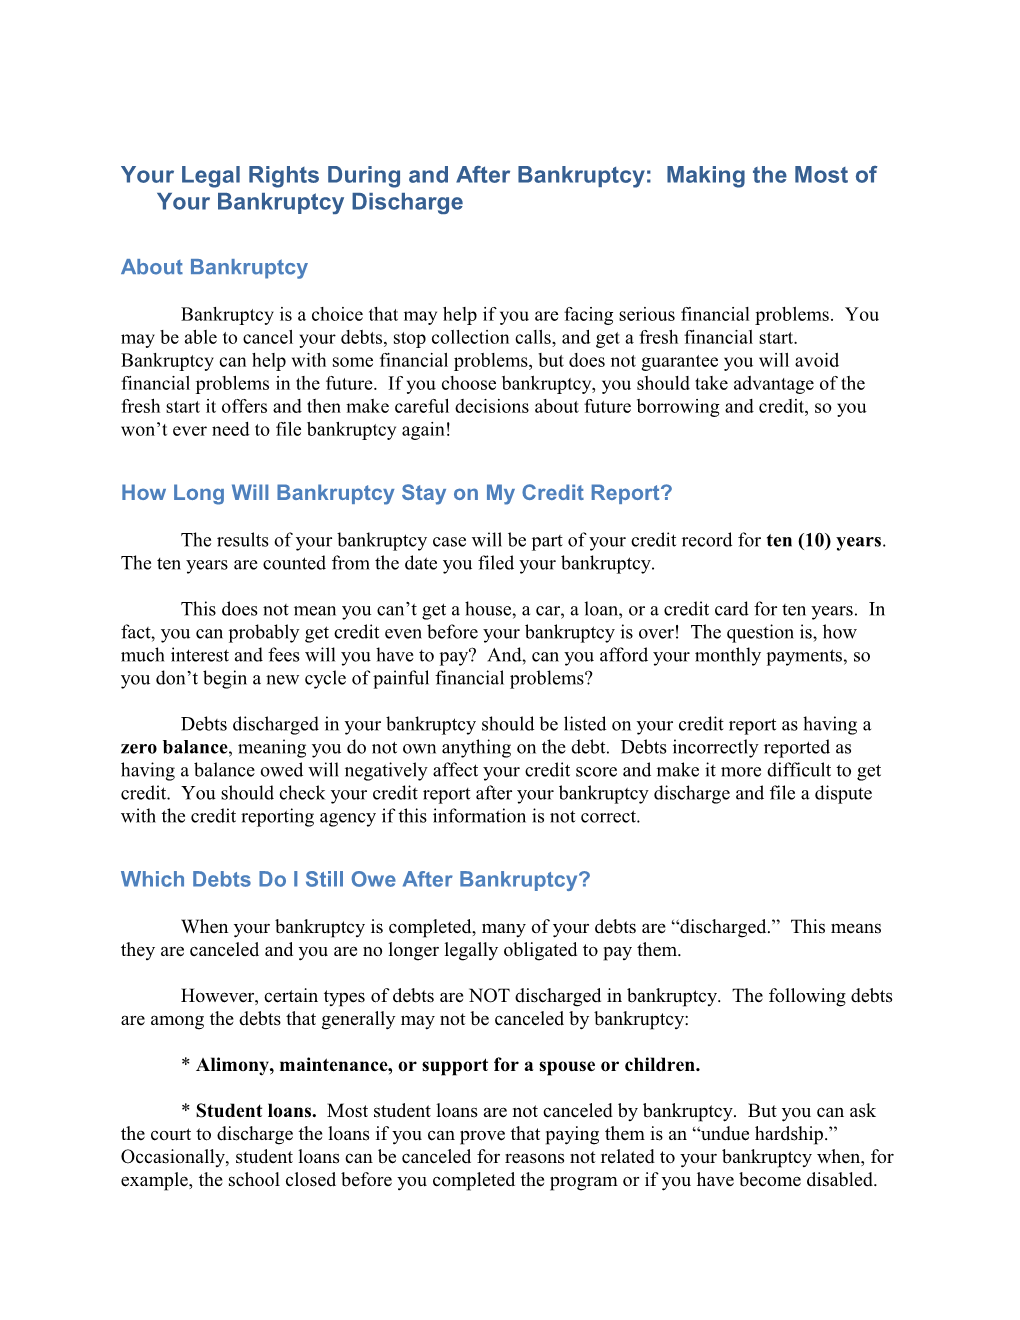 Your Legal Rights During and After Bankruptcy: Making the Most of Your Bankruptcy Discharge